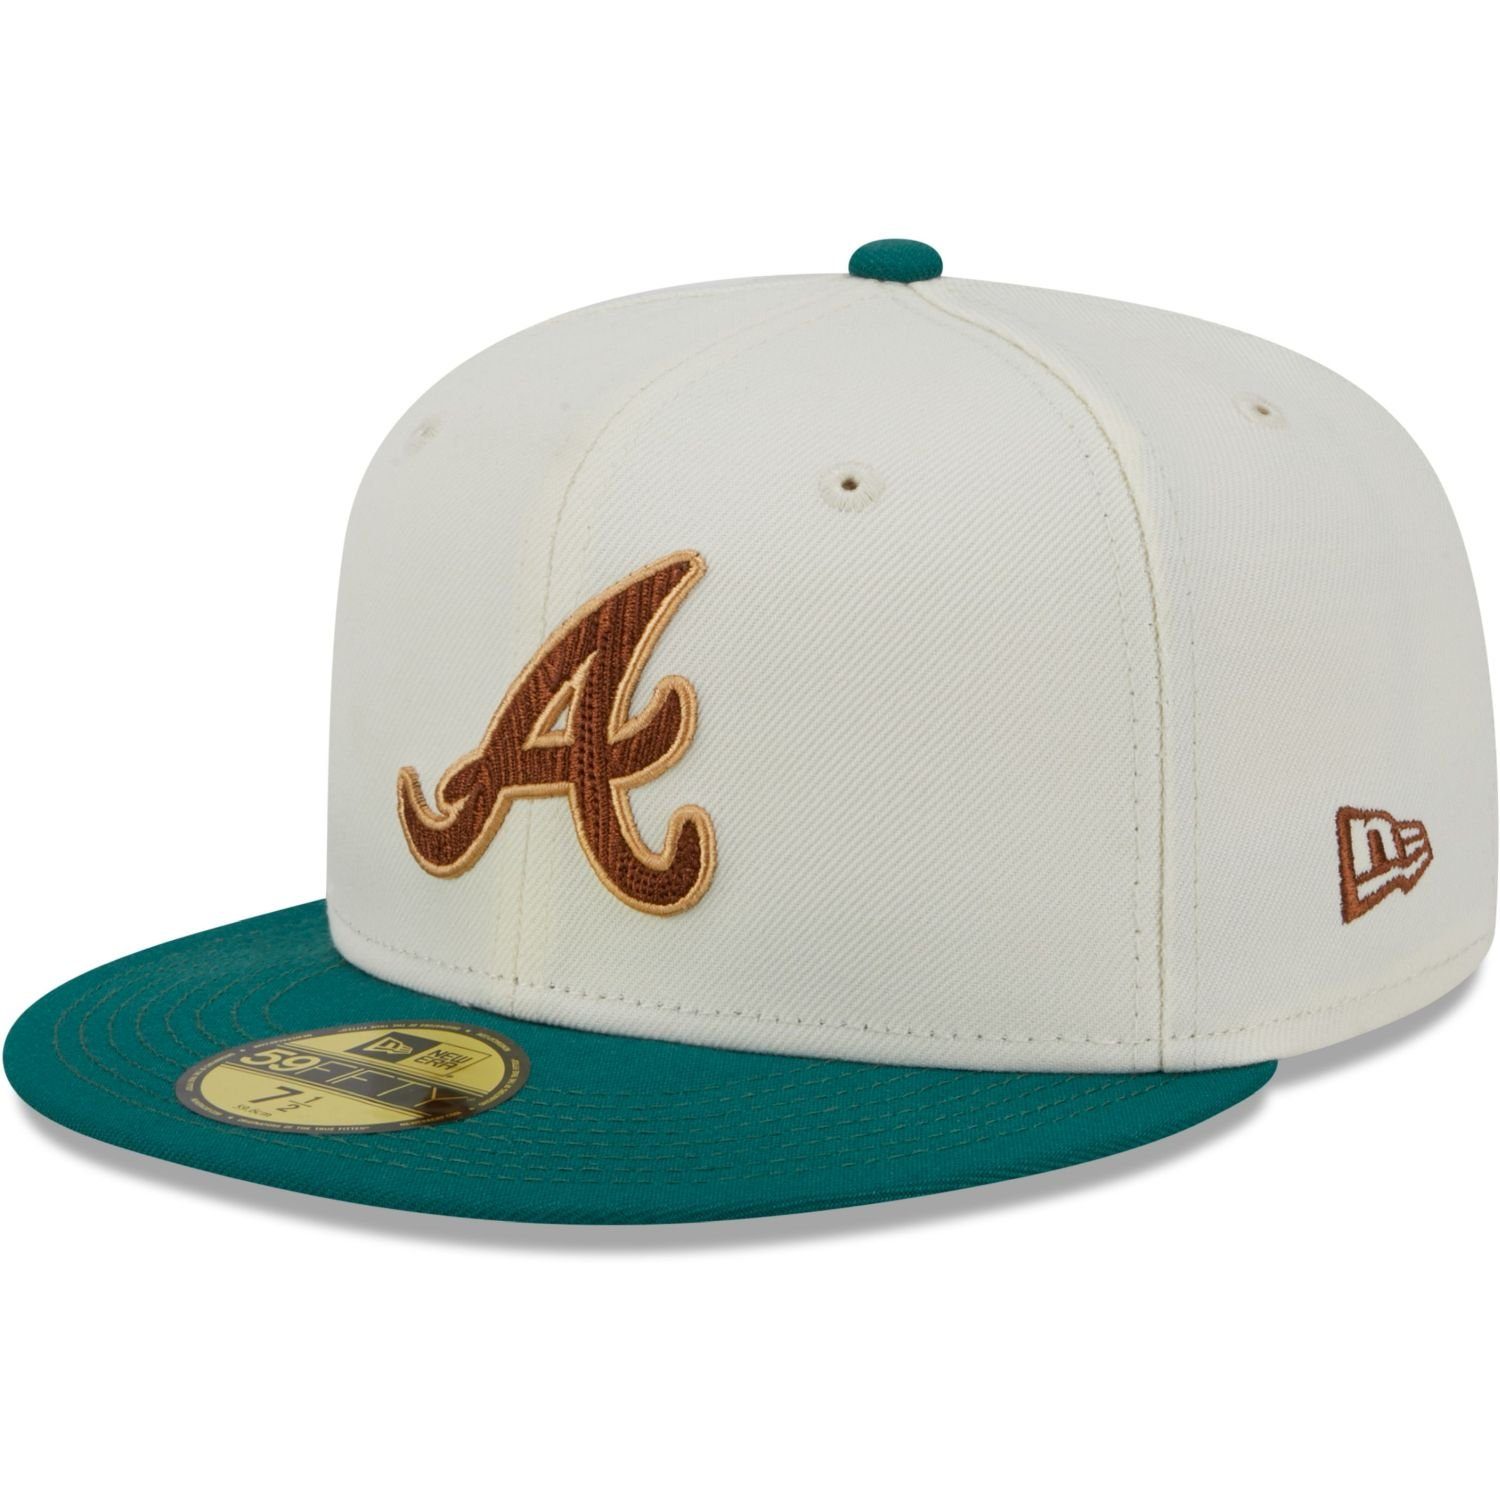 CAMP Cap Fitted Atlanta Braves New 59Fifty Era